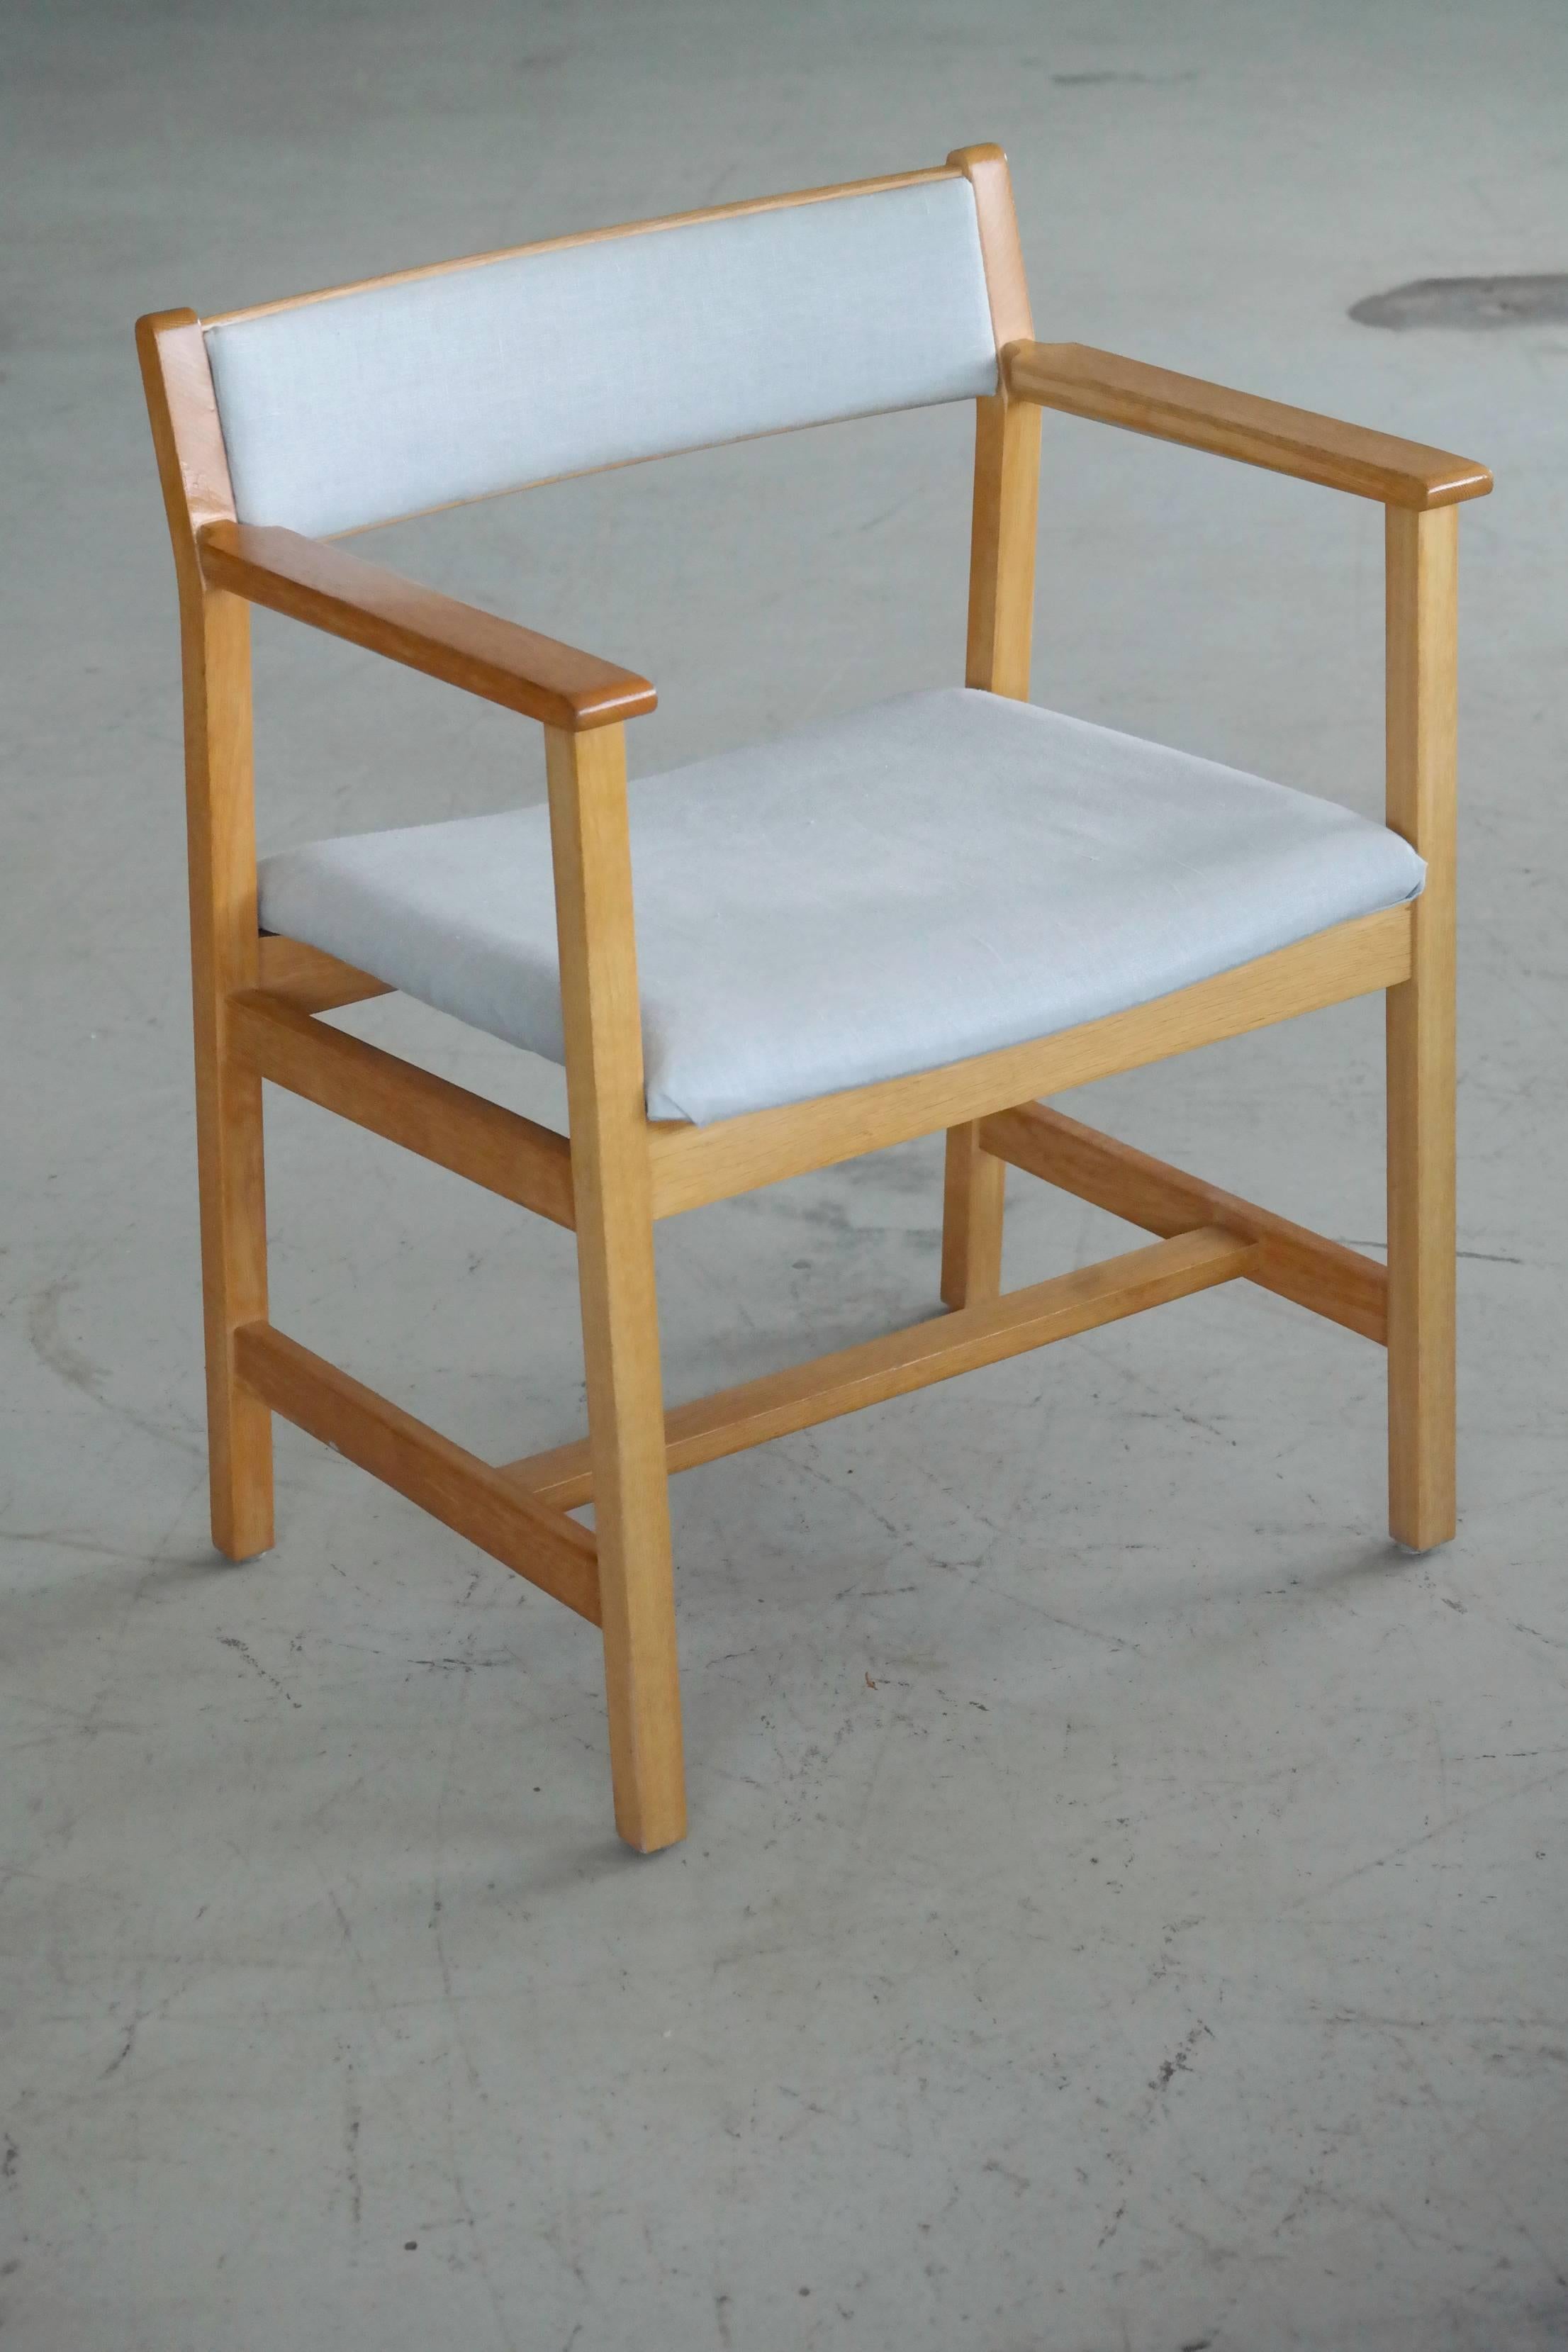 Beautiful armchair designed by Børge Mogensen in the 1960s and manufactured by Fredericia. Typical of Mogensen's timeless elegance with minimalistic sharp yet refined lines. Made in oak with manufacturer's label in the bottom. Recently